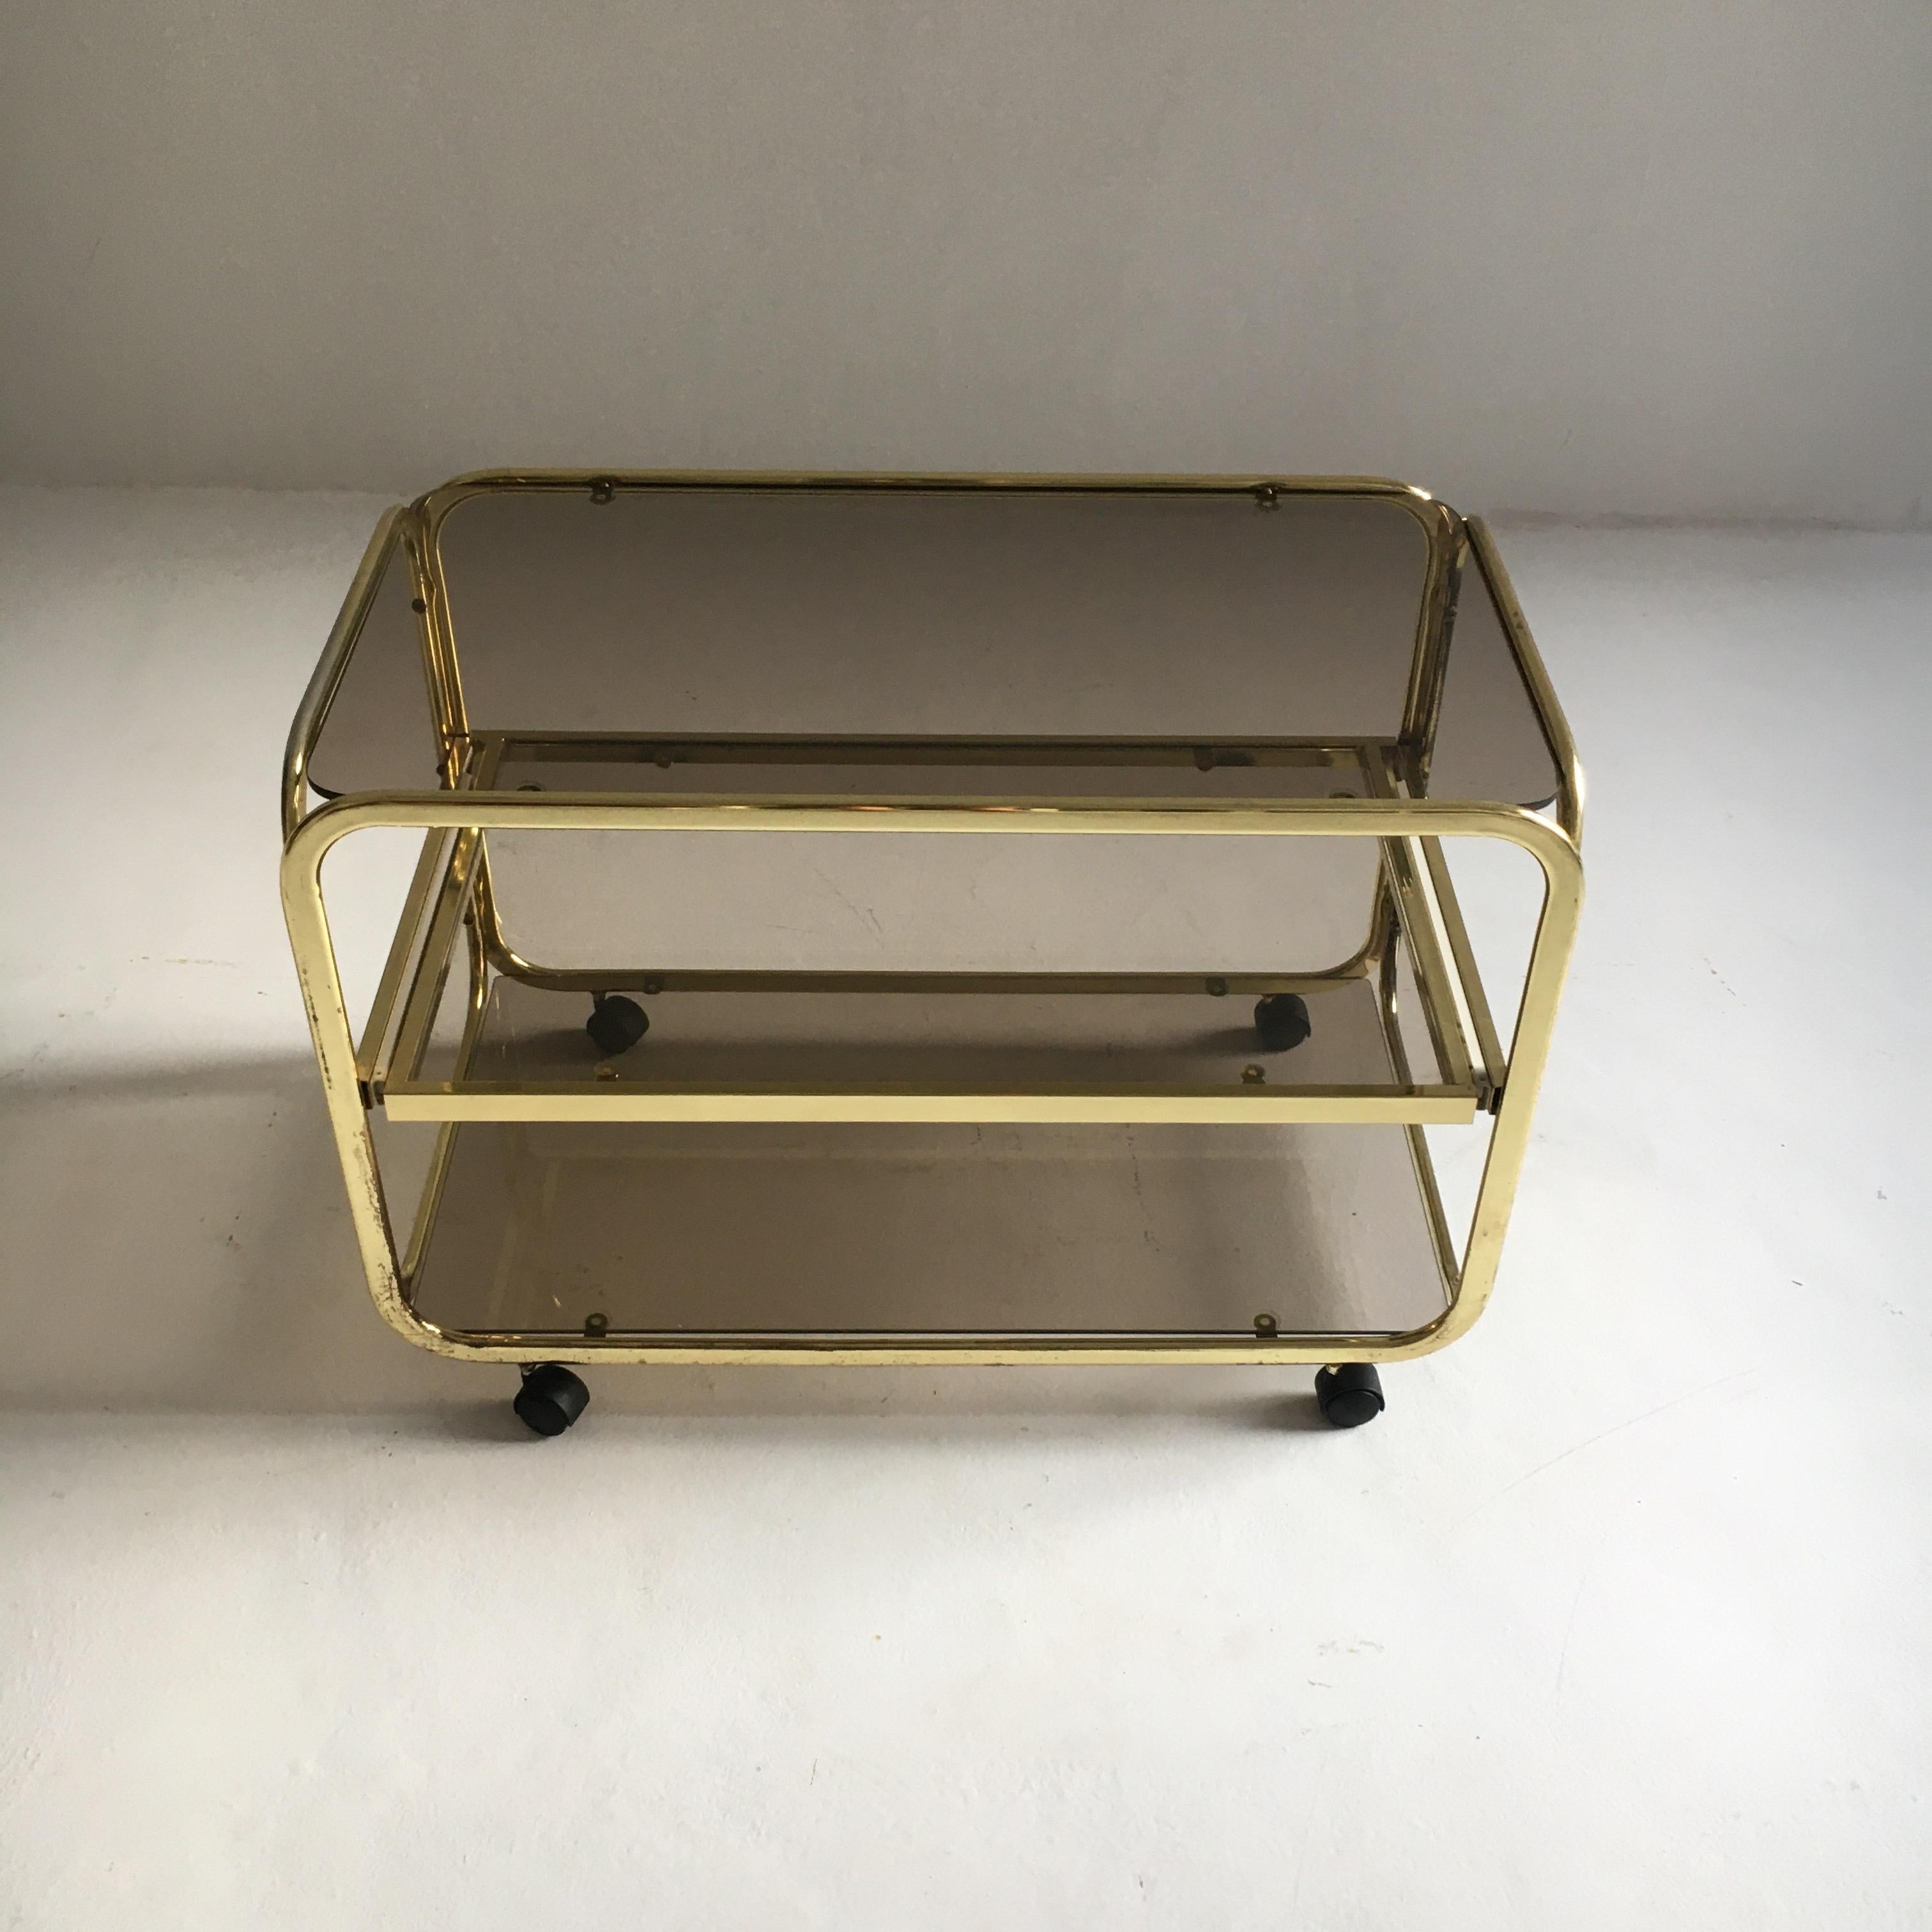 Vintage brass plated bar cart table brown smoked glass plates by Morex, 1970s.